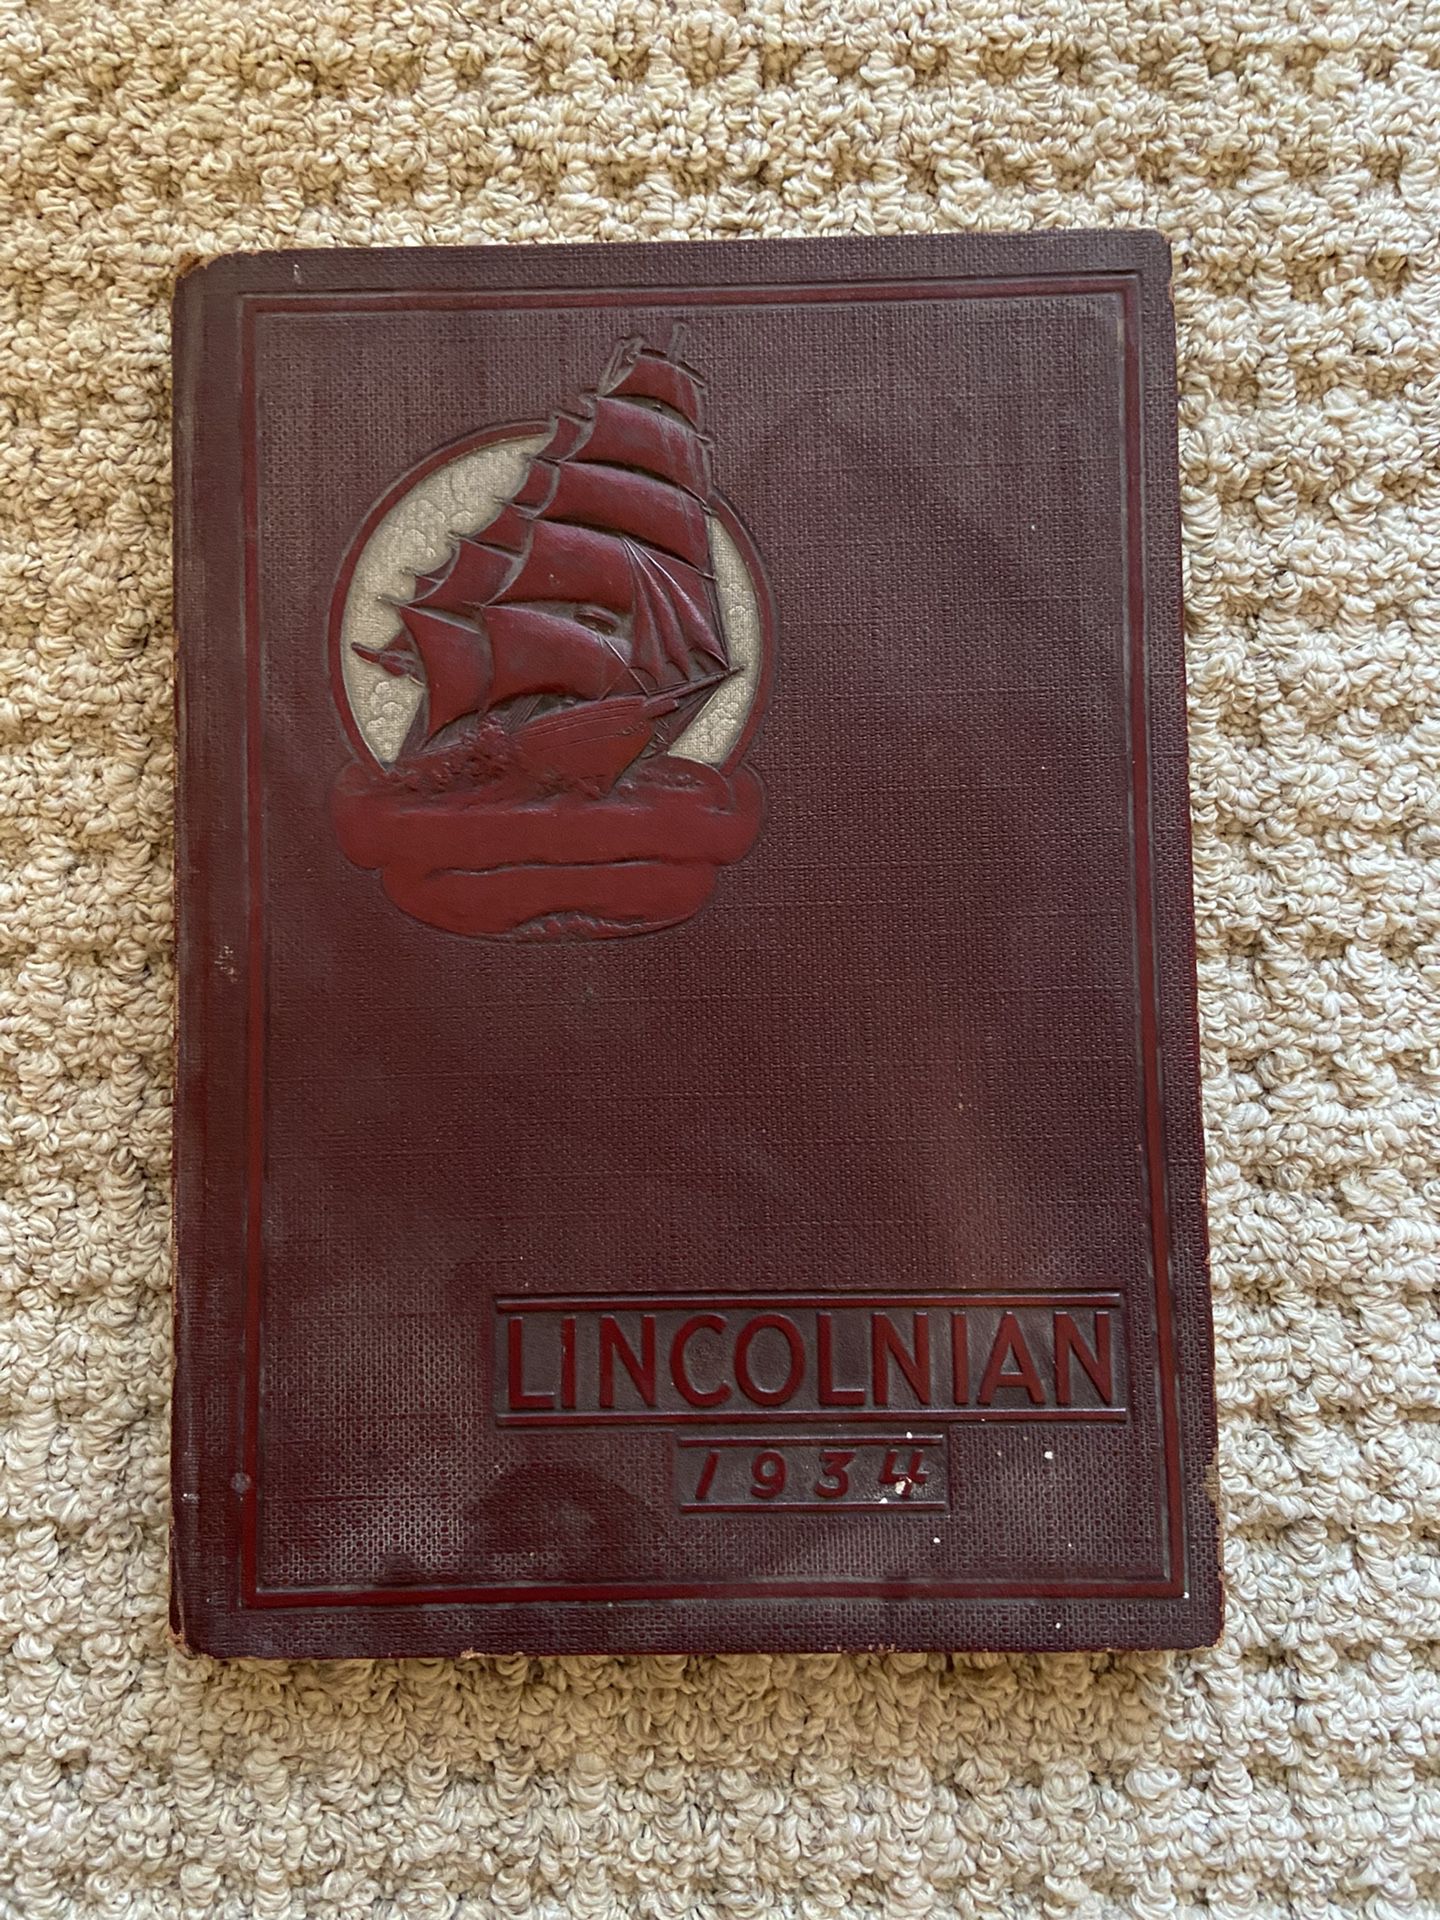 Yearbook 1934 Lincoln Of Tacoma 